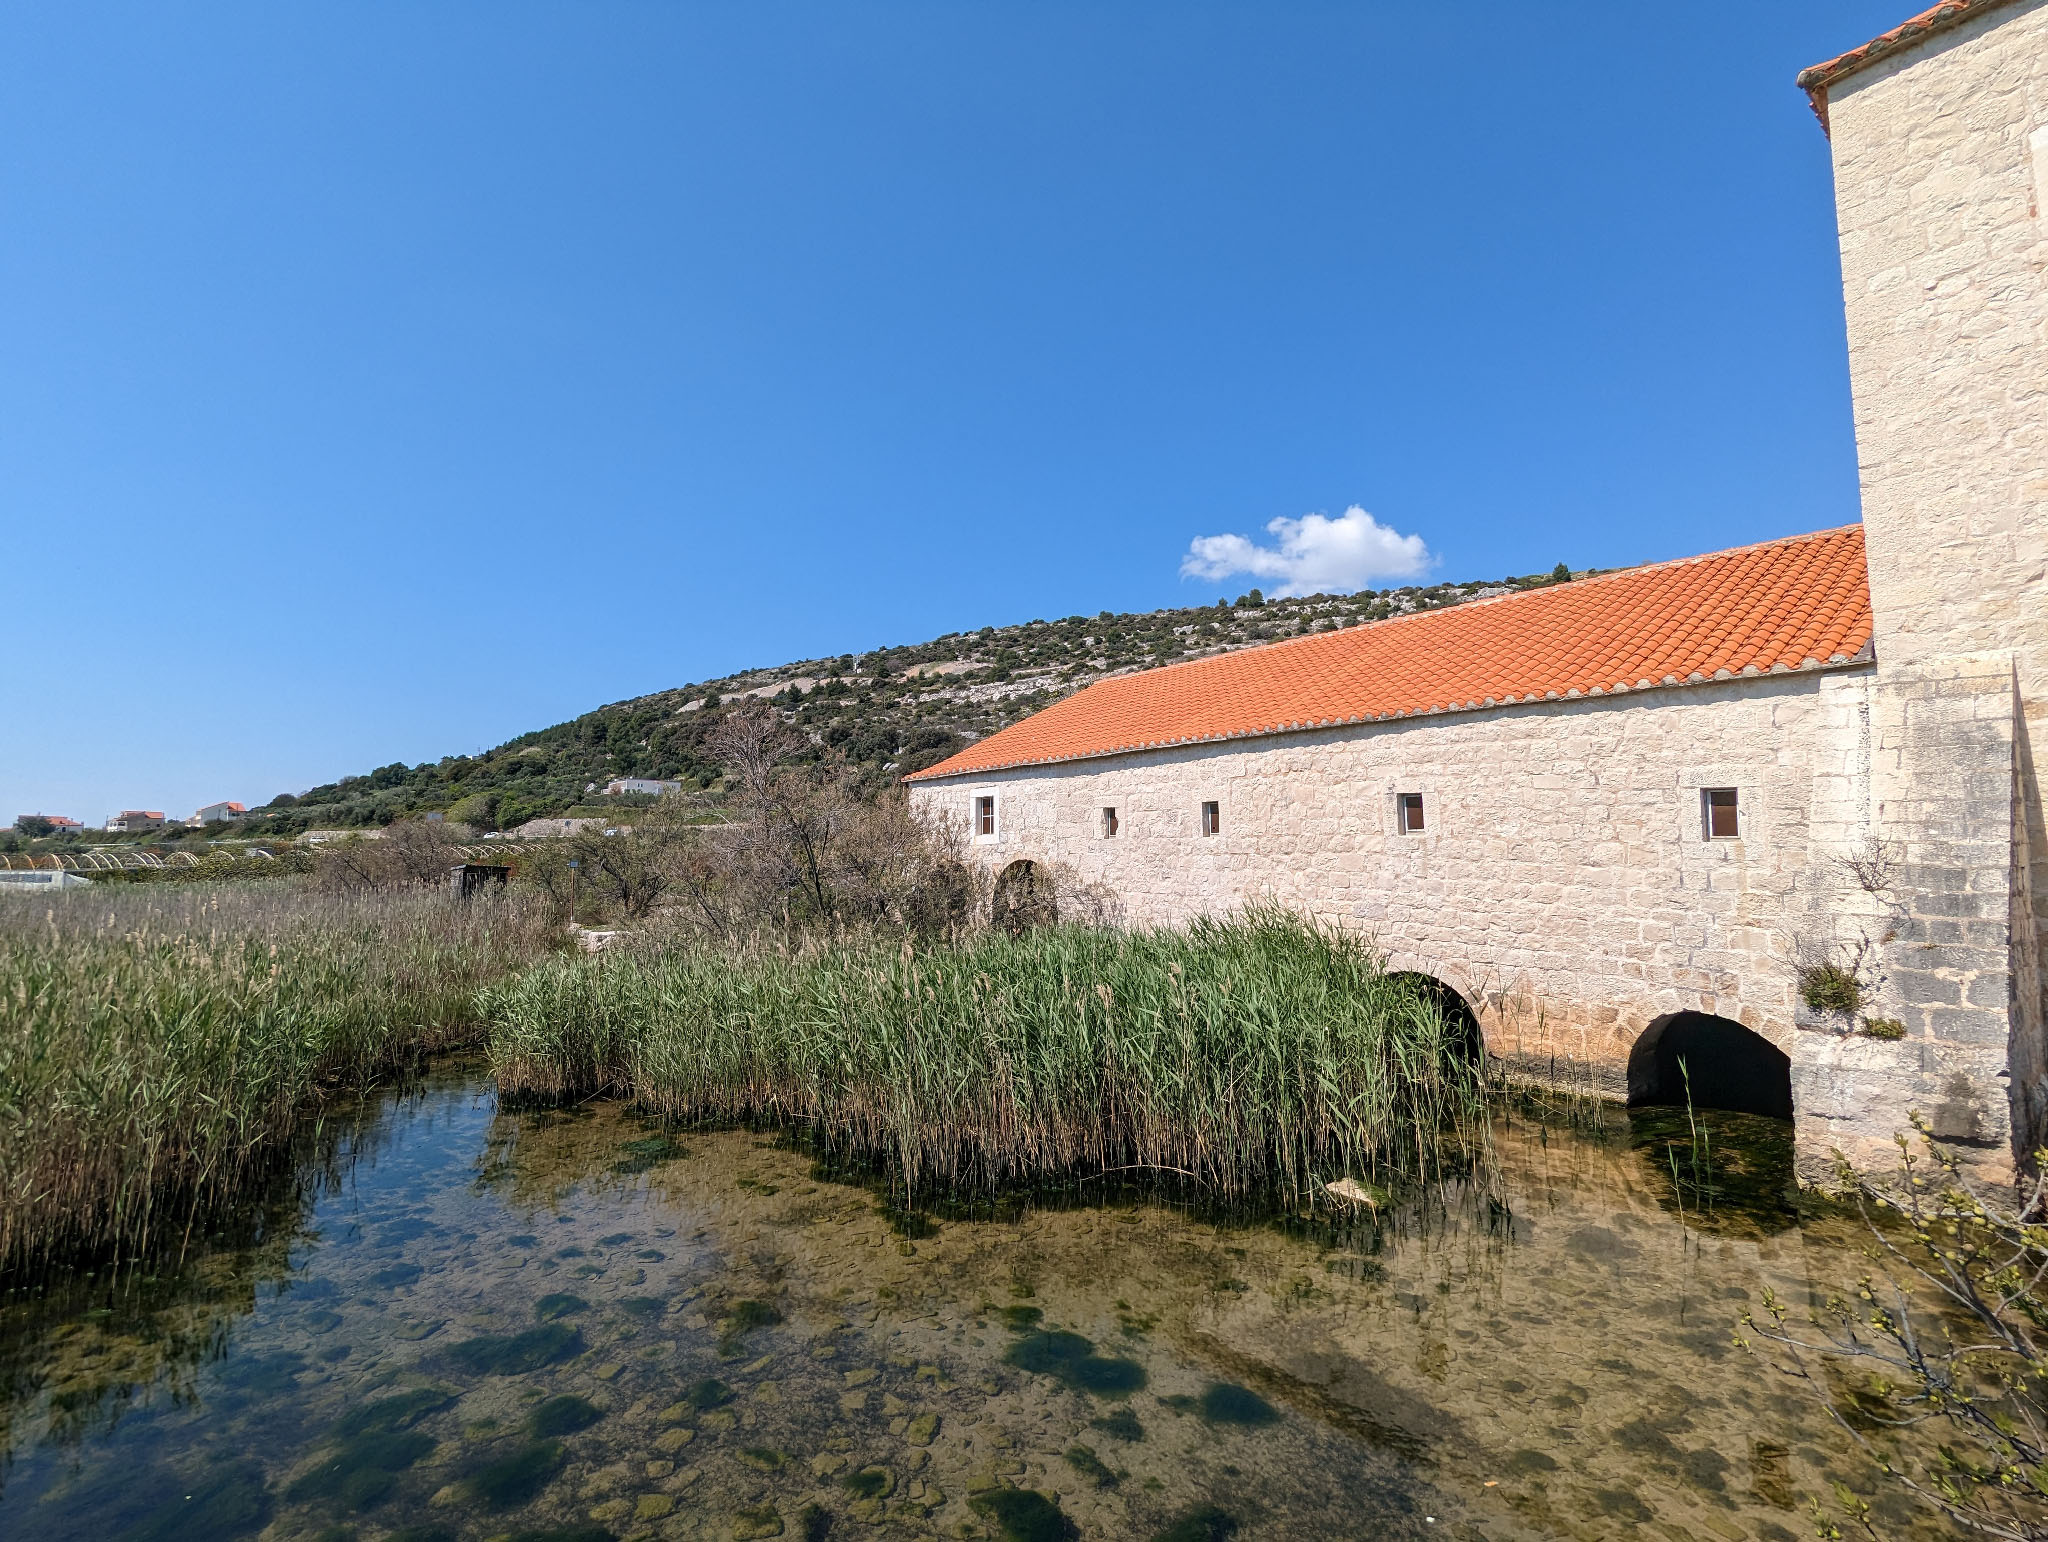 Rear of a mill with stone walls, some arches in the base where the lake water flows, and some red tile roofing. Reeds grow in the water. A single small cloud is in a bright blue sky.